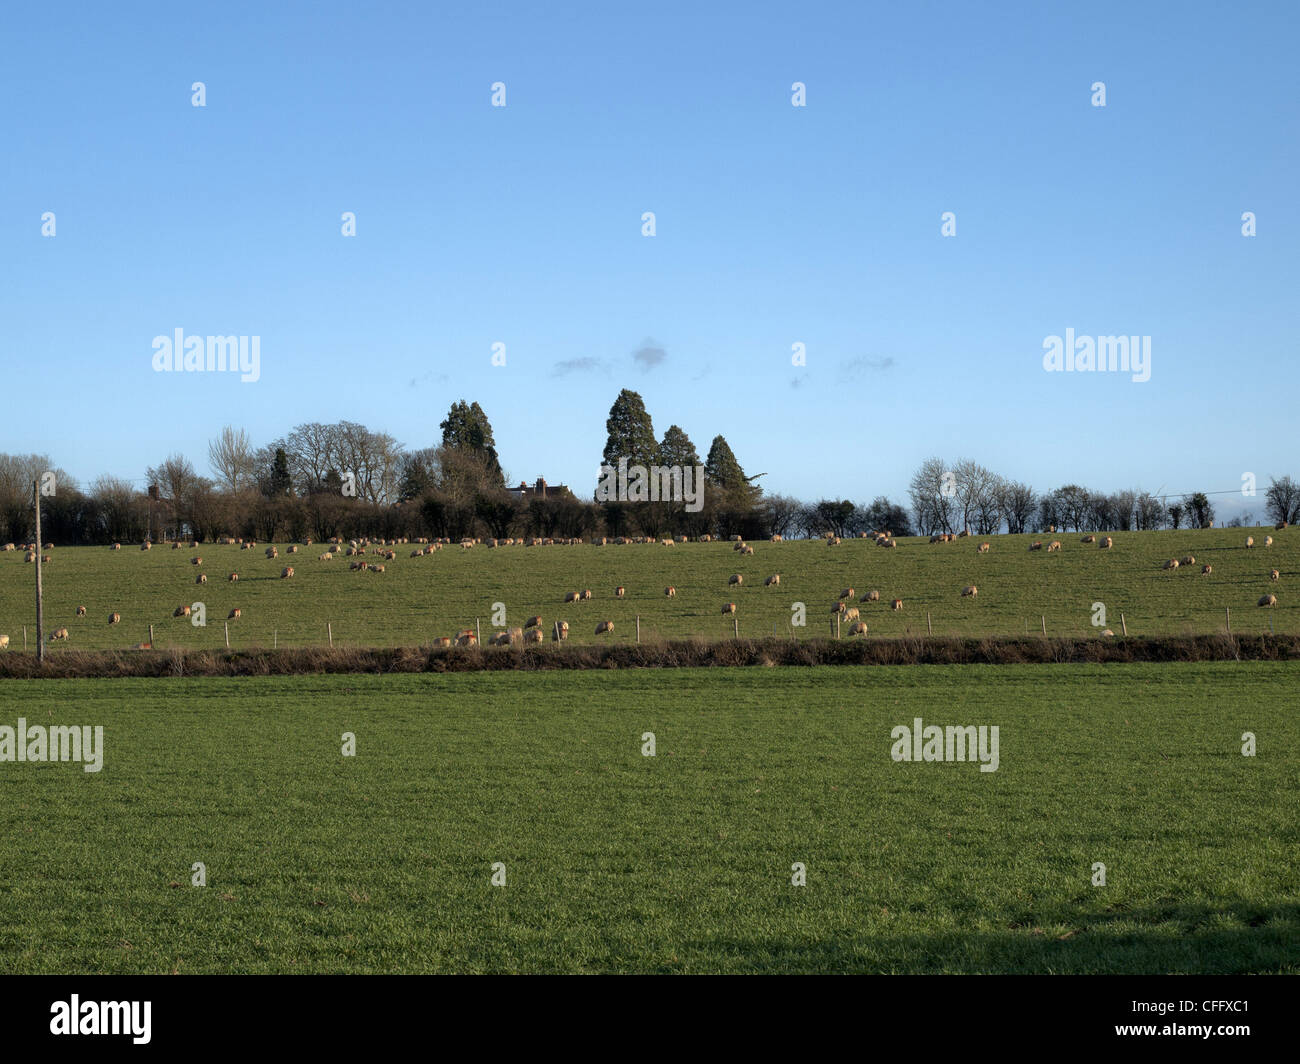 images of england Stock Photo